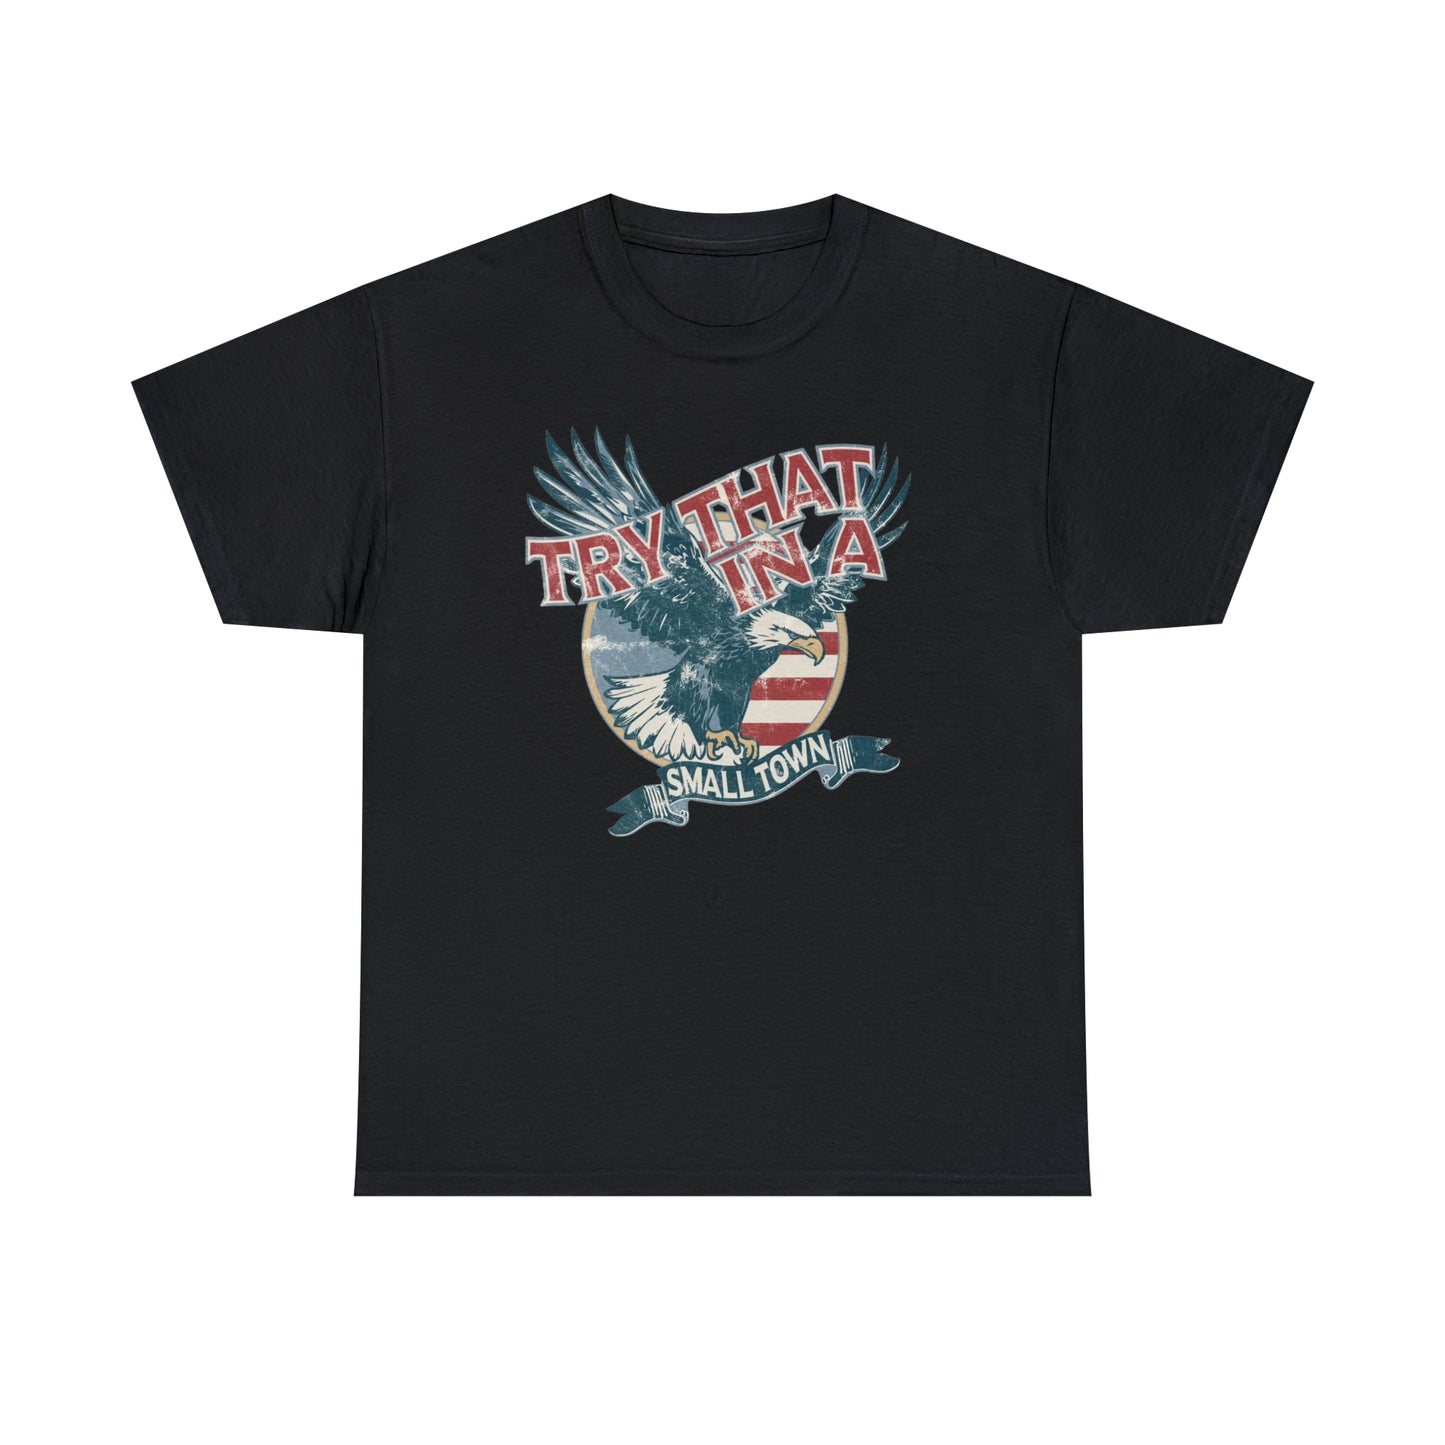 Try that in a small town Eagle Unisex Heavy Cotton Tee - Black / S - Black / M - Black / L - Black / XL - Black / 2XL - Black / 3XL - Black / 4XL - Black / 5XL